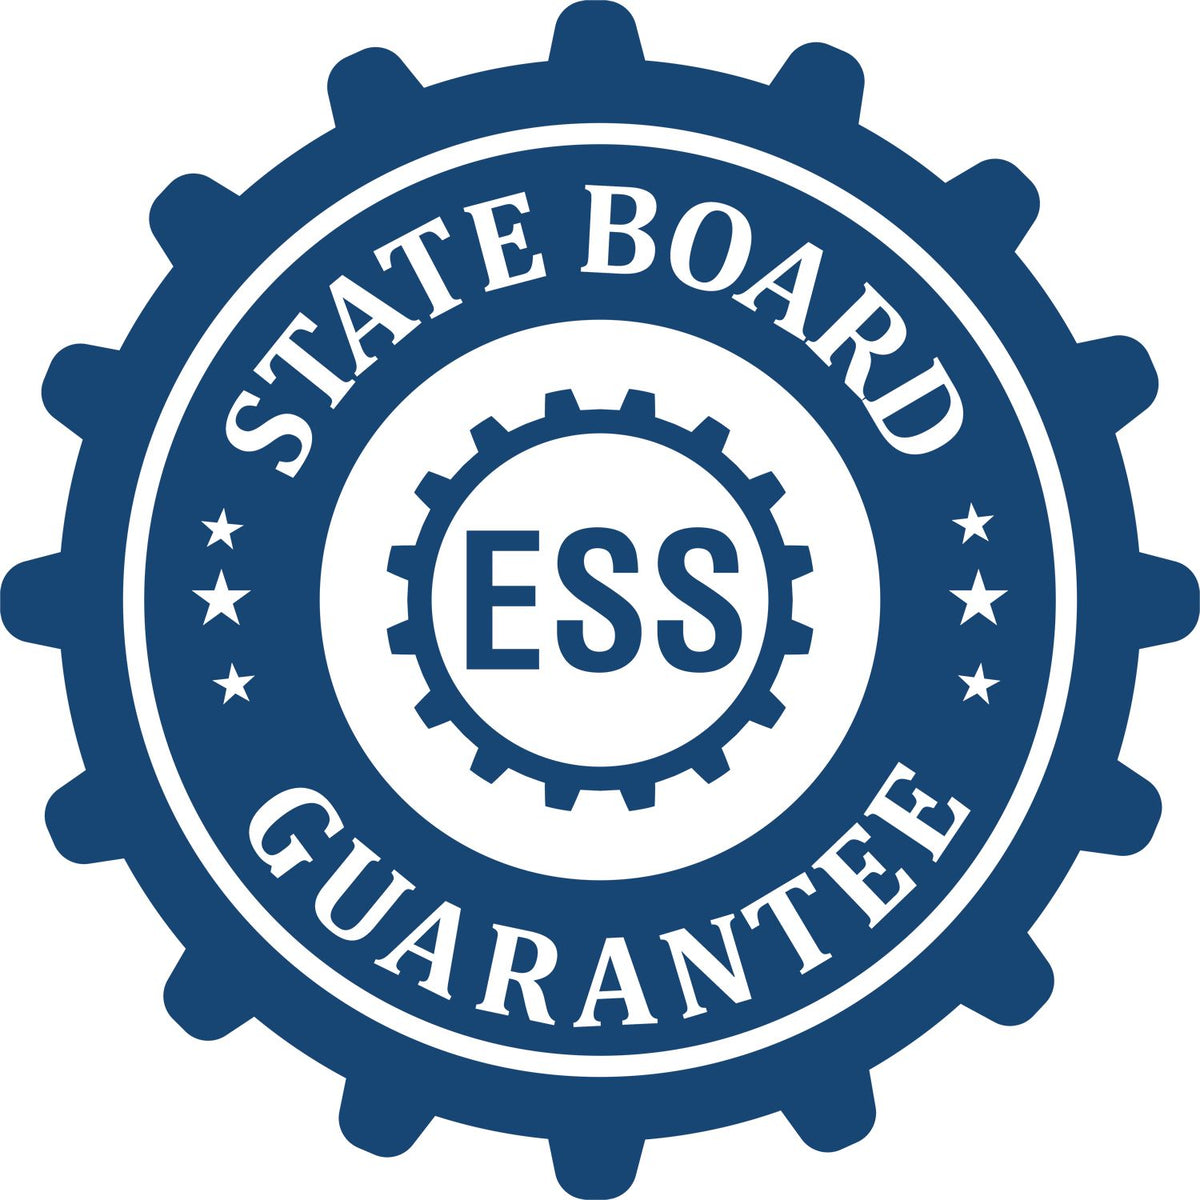 An emblem in a gear shape illustrating a state board guarantee for the State of New Jersey Extended Long Reach Geologist Seal